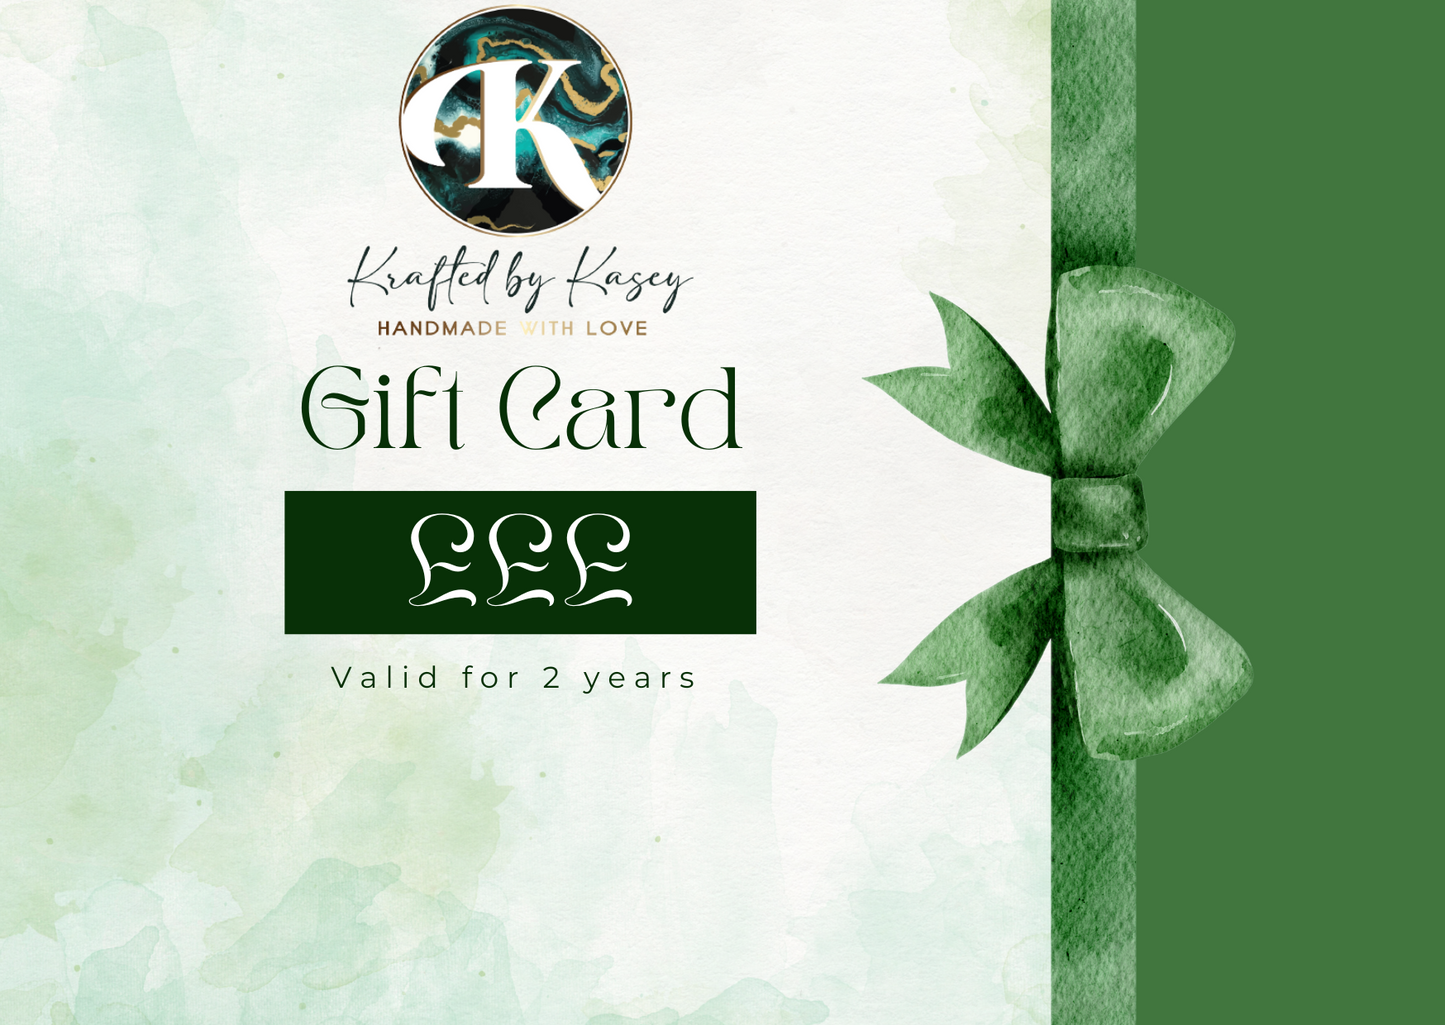 Krafted By Kasey Gift Card